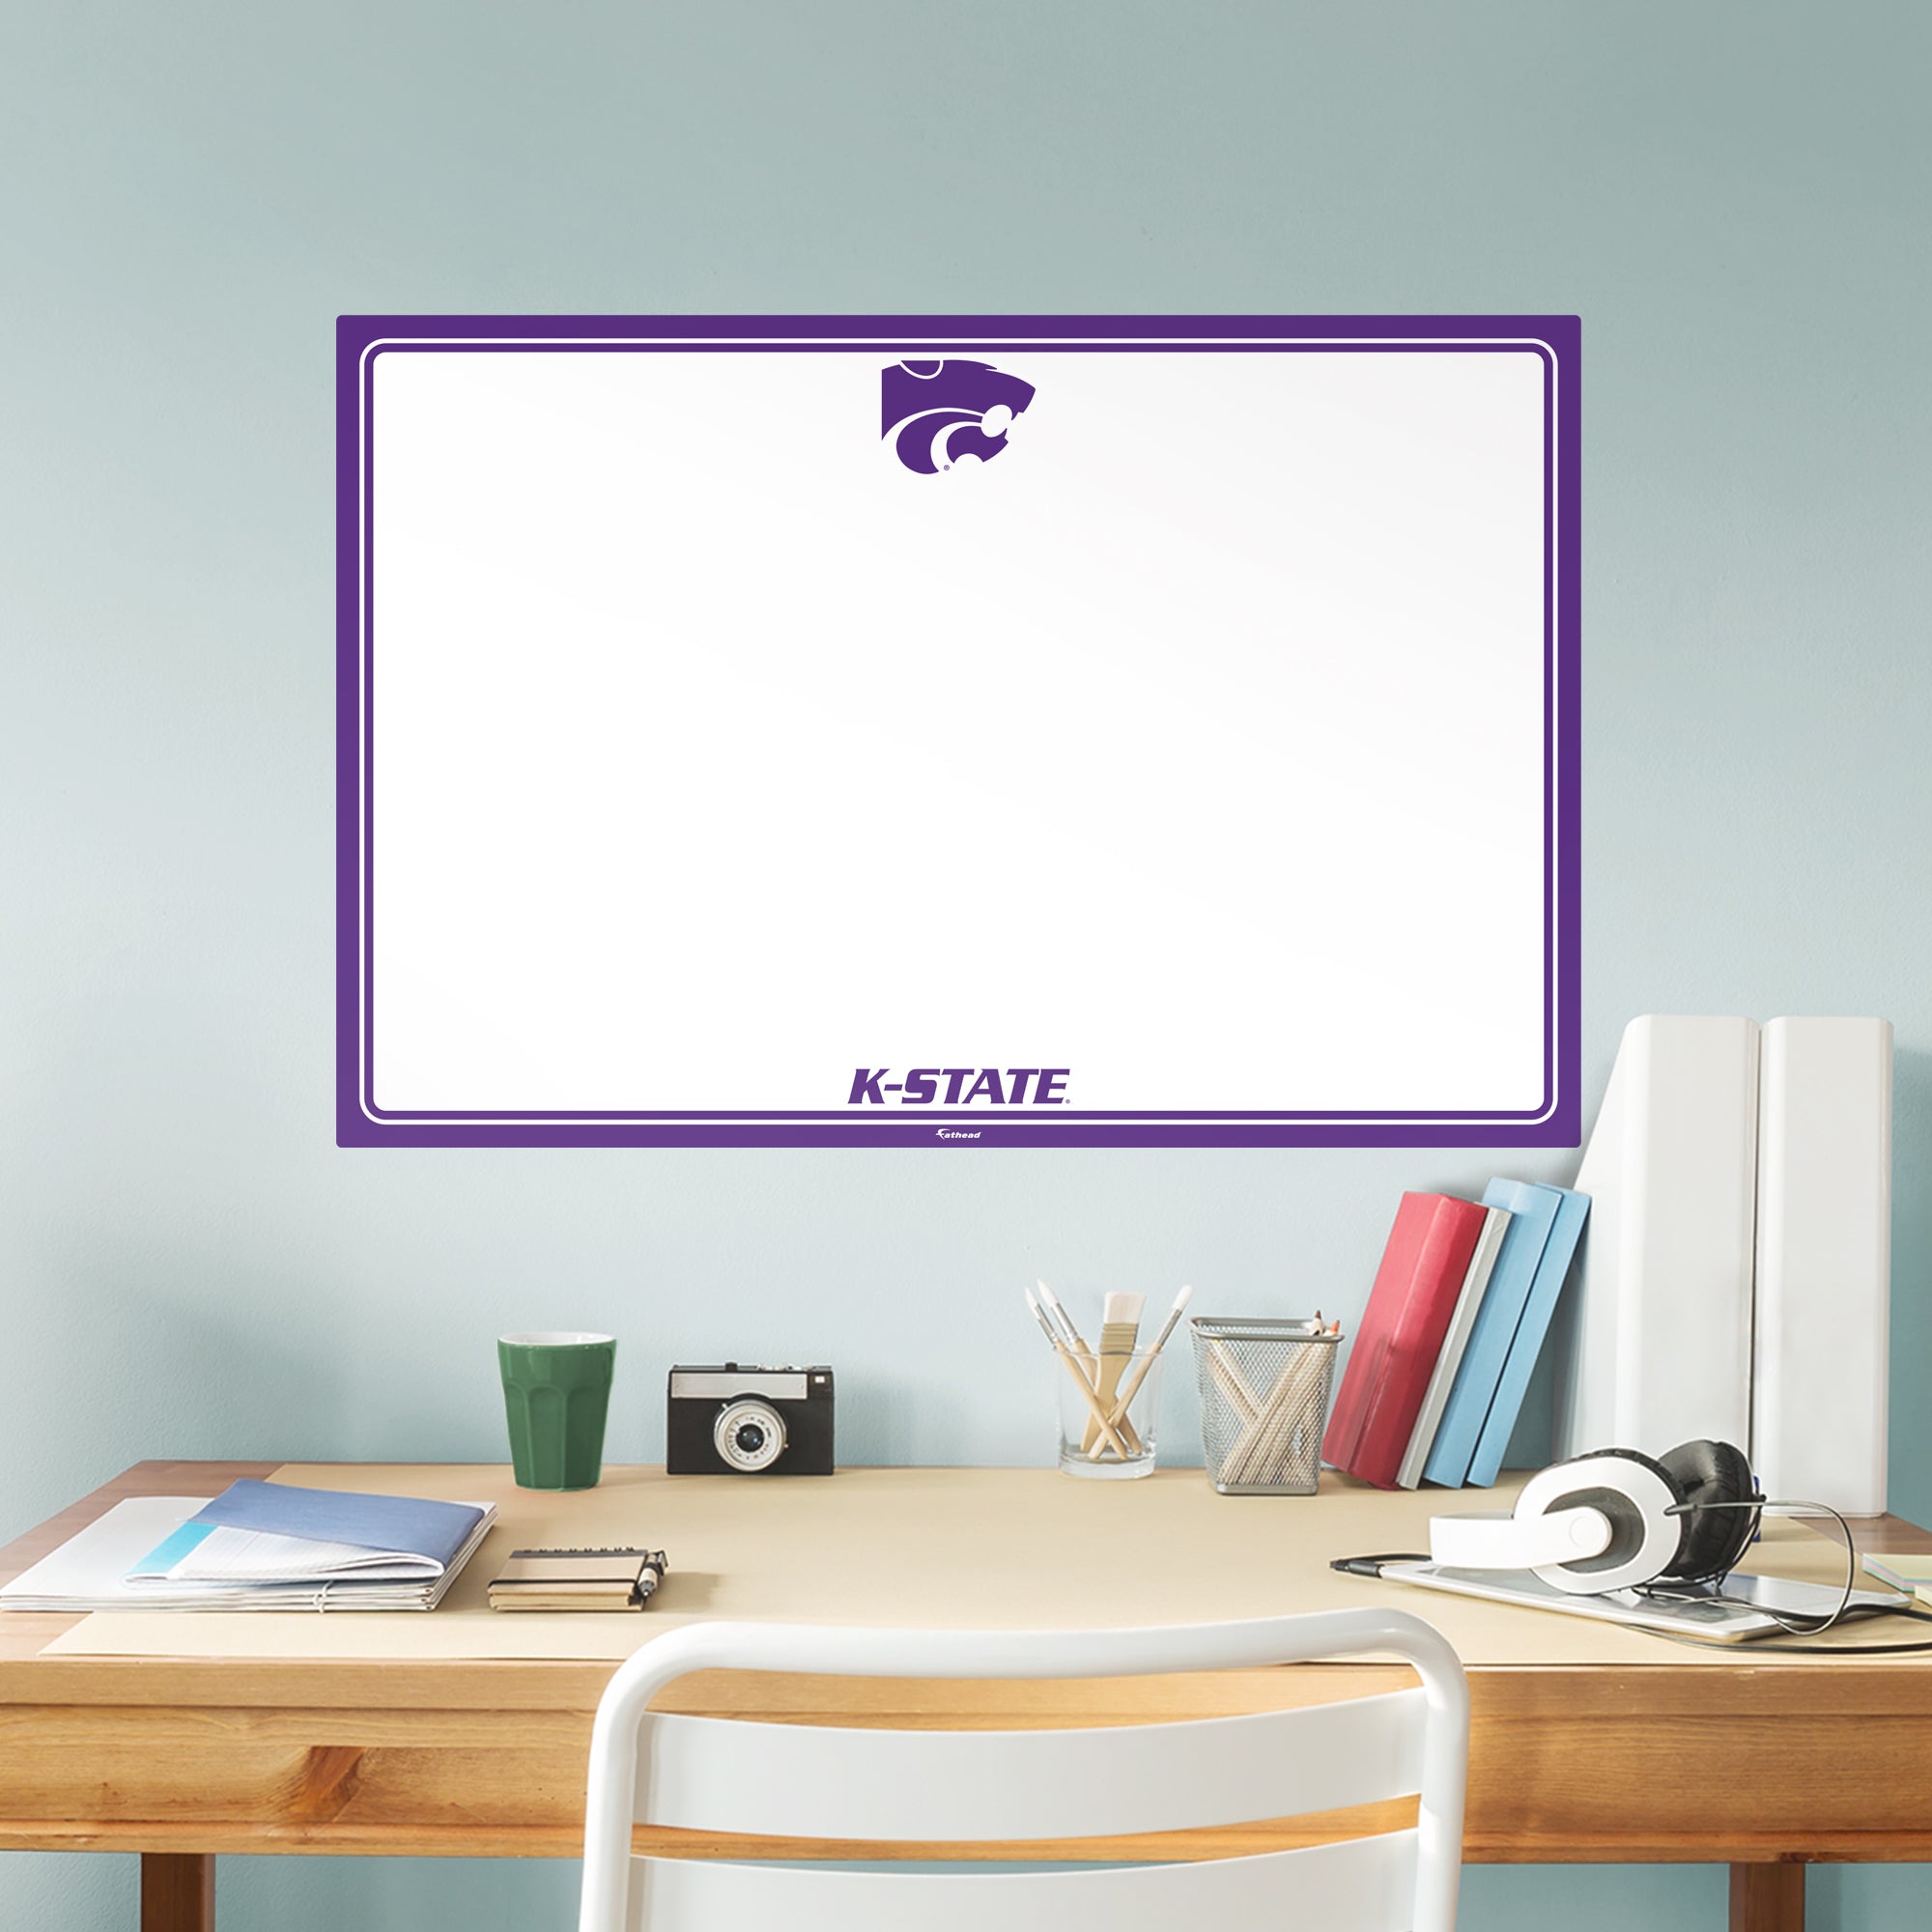 Kansas State Wildcats: Dry Erase Whiteboard - X-Large Officially Licensed NCAA Removable Wall Decal XL by Fathead | Vinyl